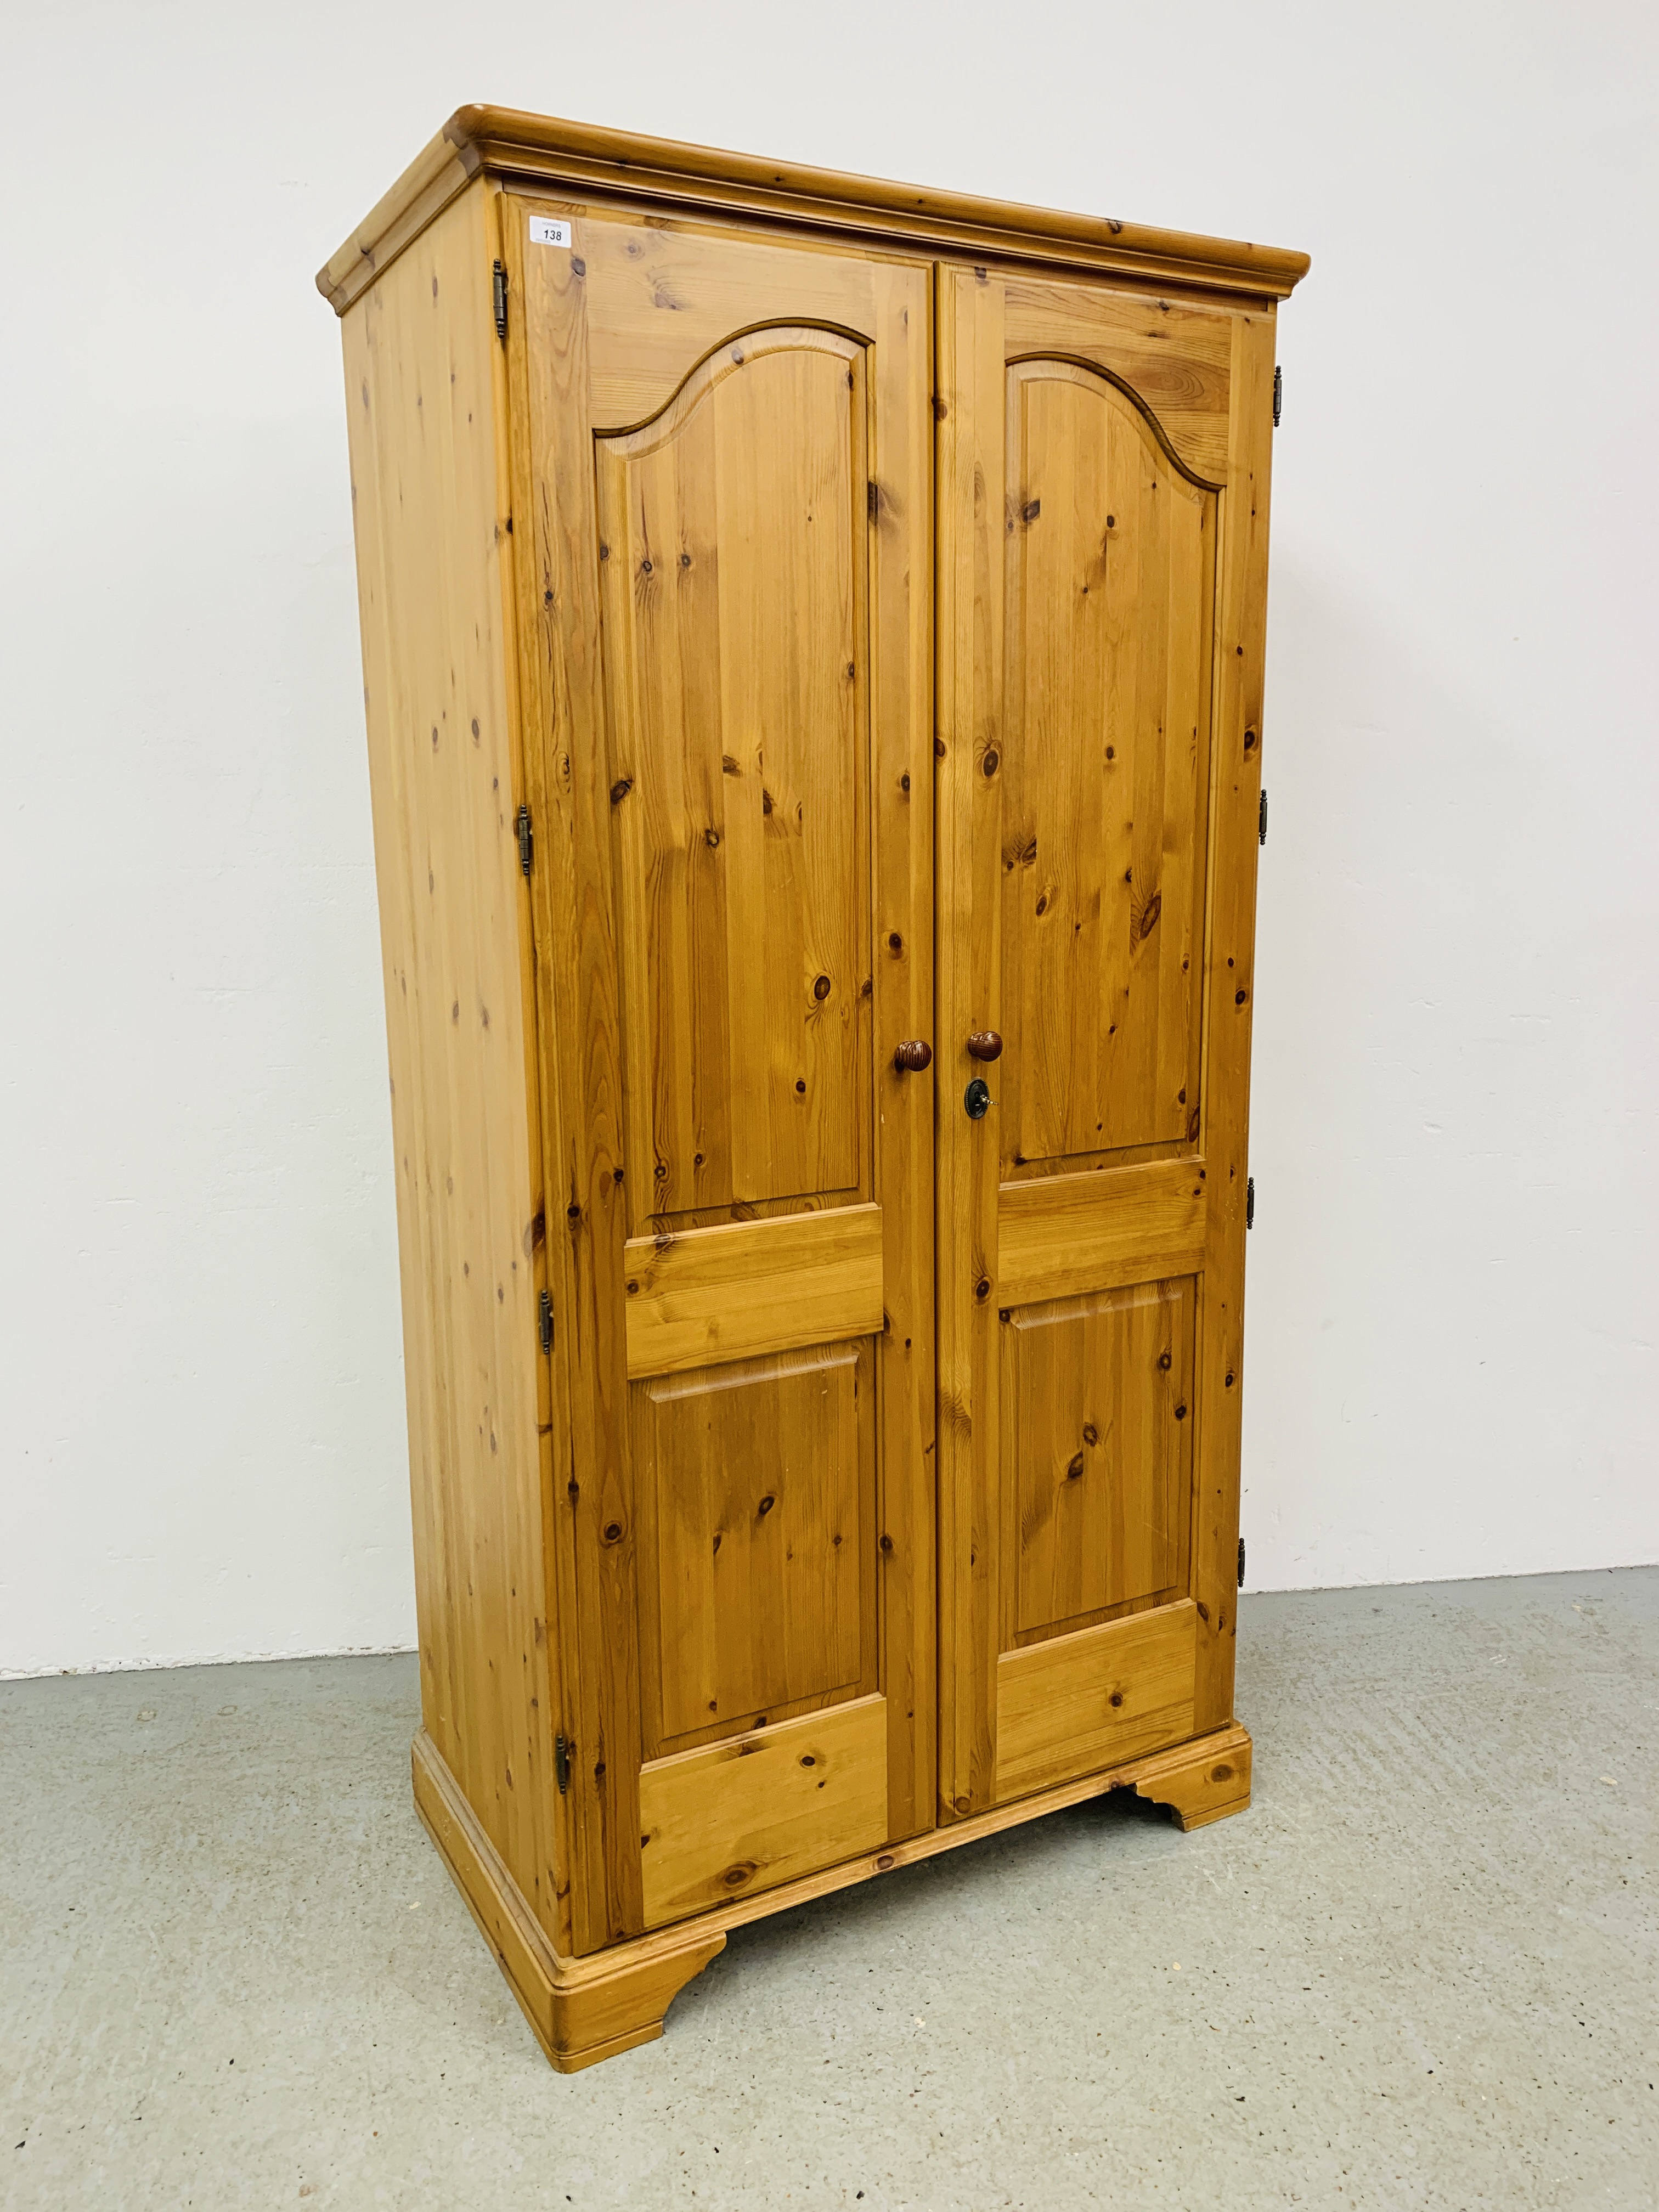 A GOOD QUALITY MODERN HONEY PINE DOUBLE WARDROBE MANUFACTURED BY LINDALE FURNISHINGS W 98CM, D 56CM,